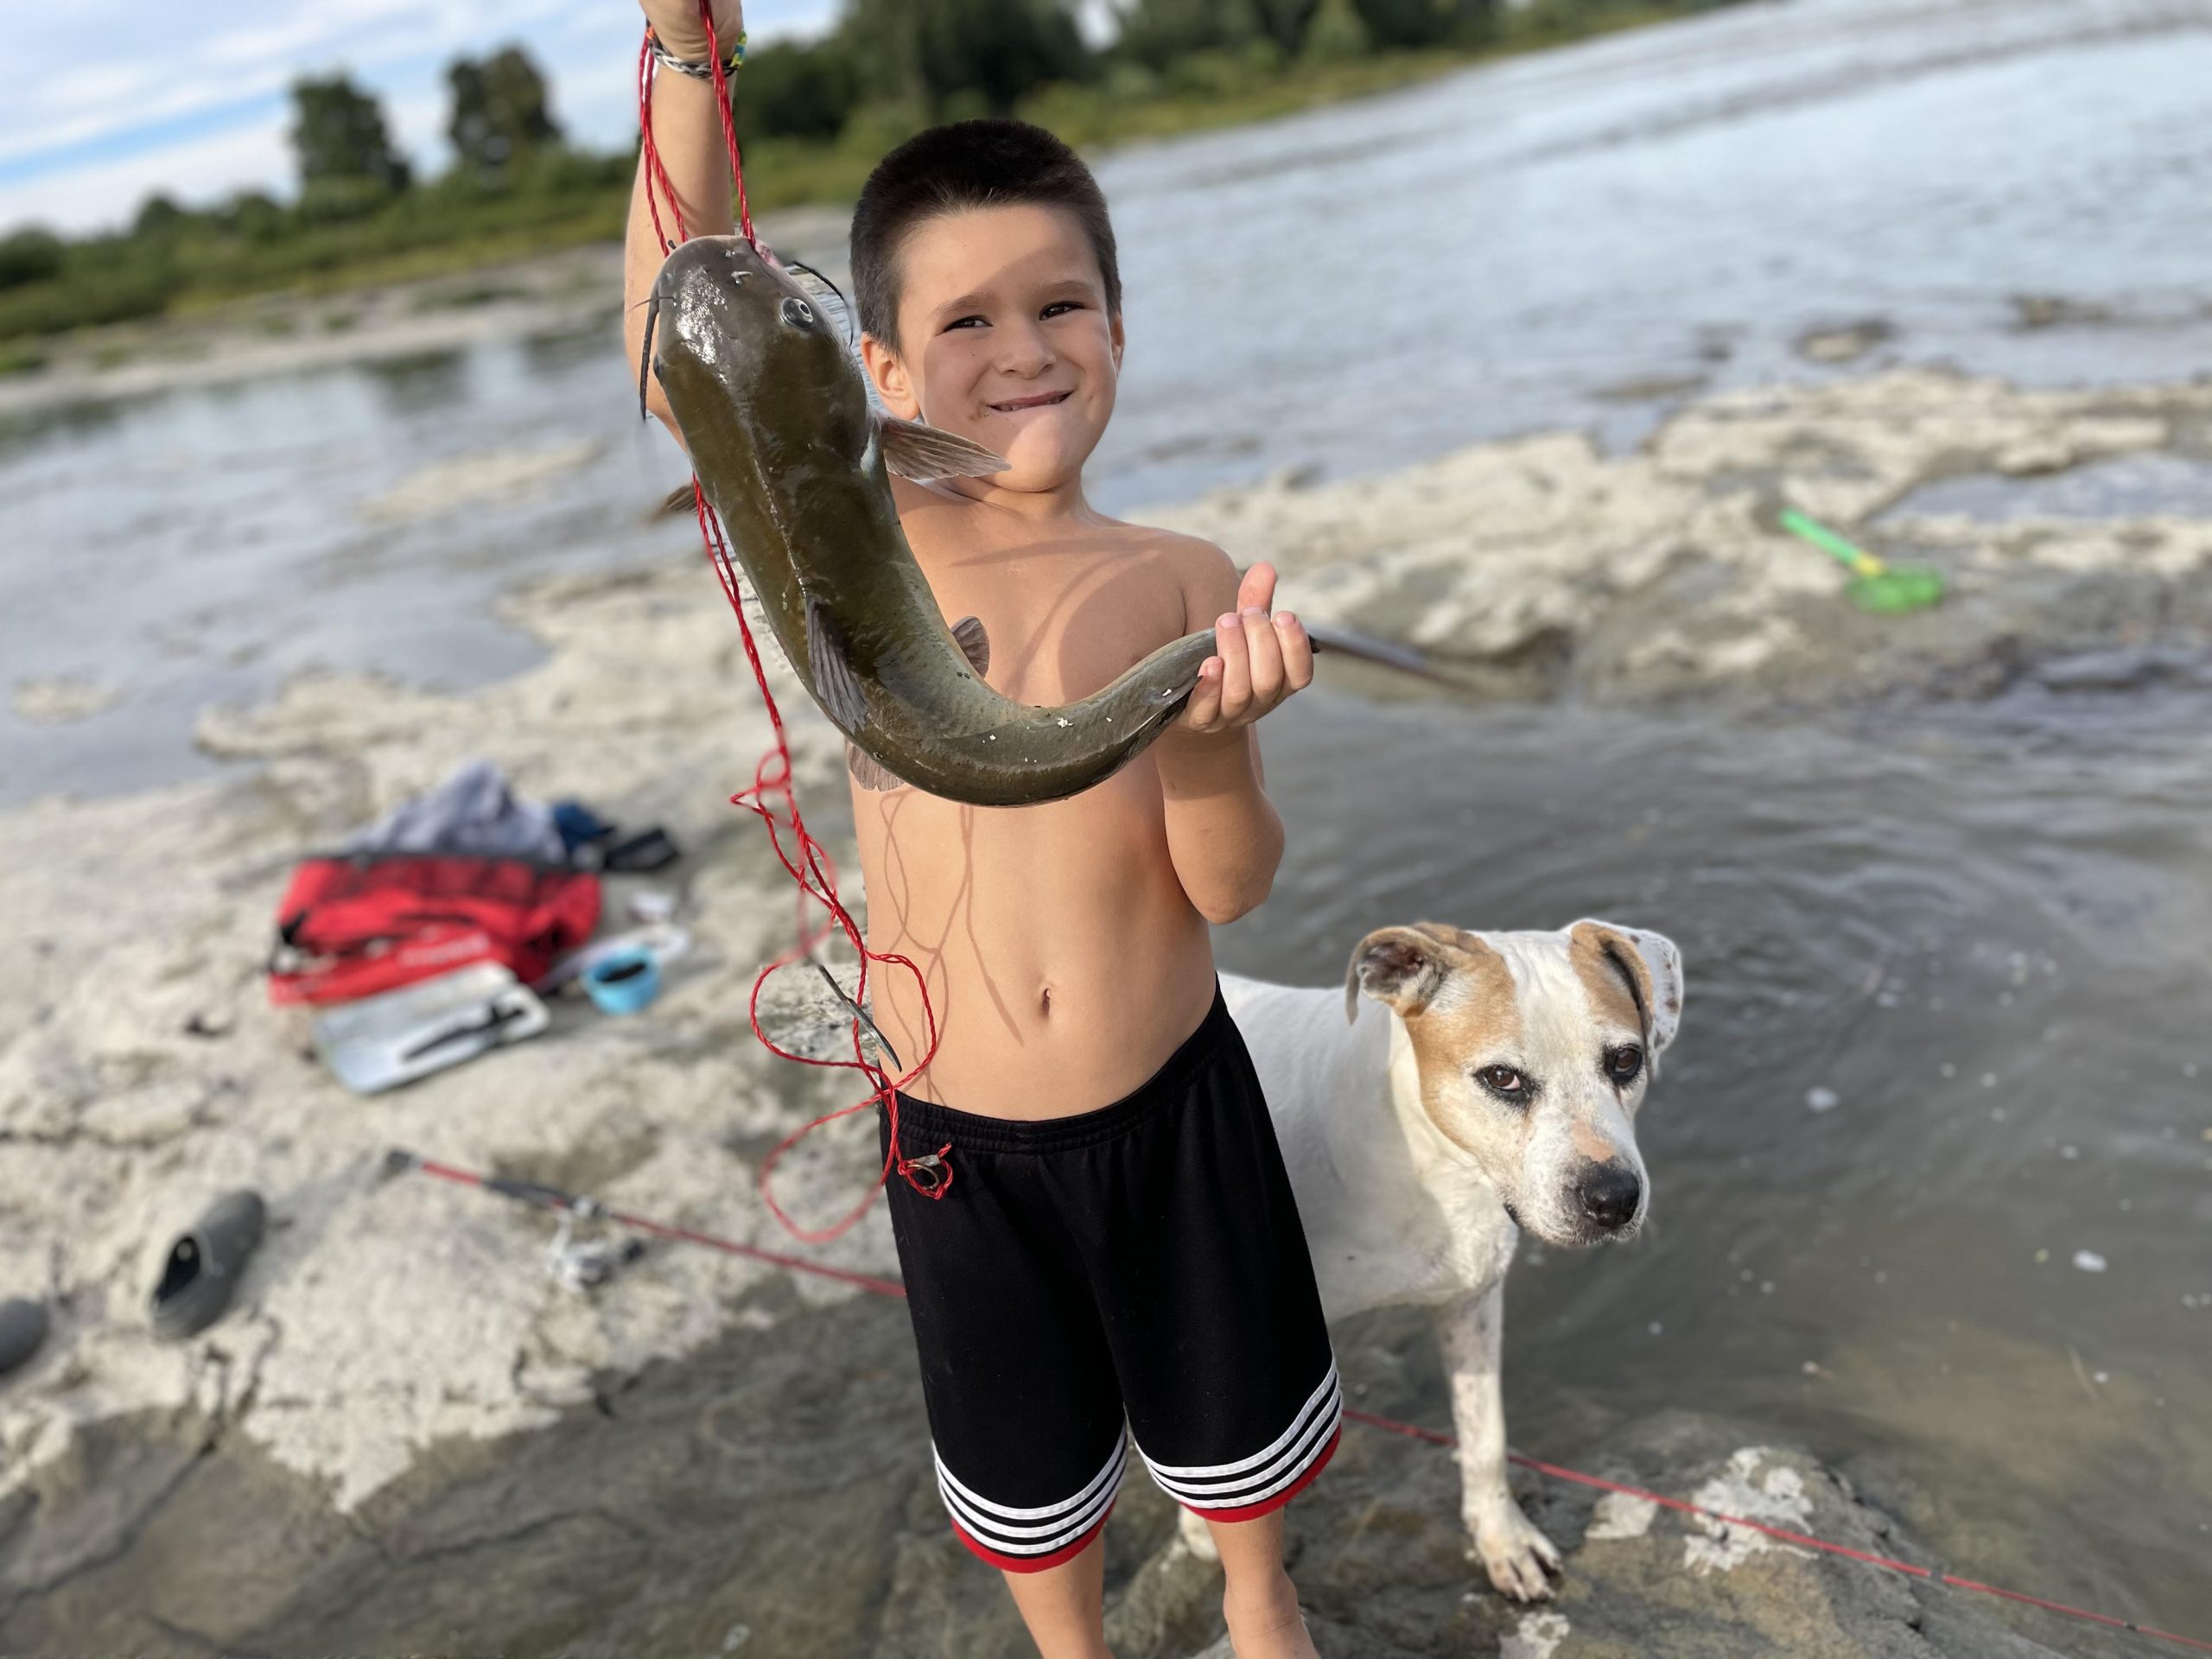 Maumee river report- 24 sept 22- Last day of kayak season